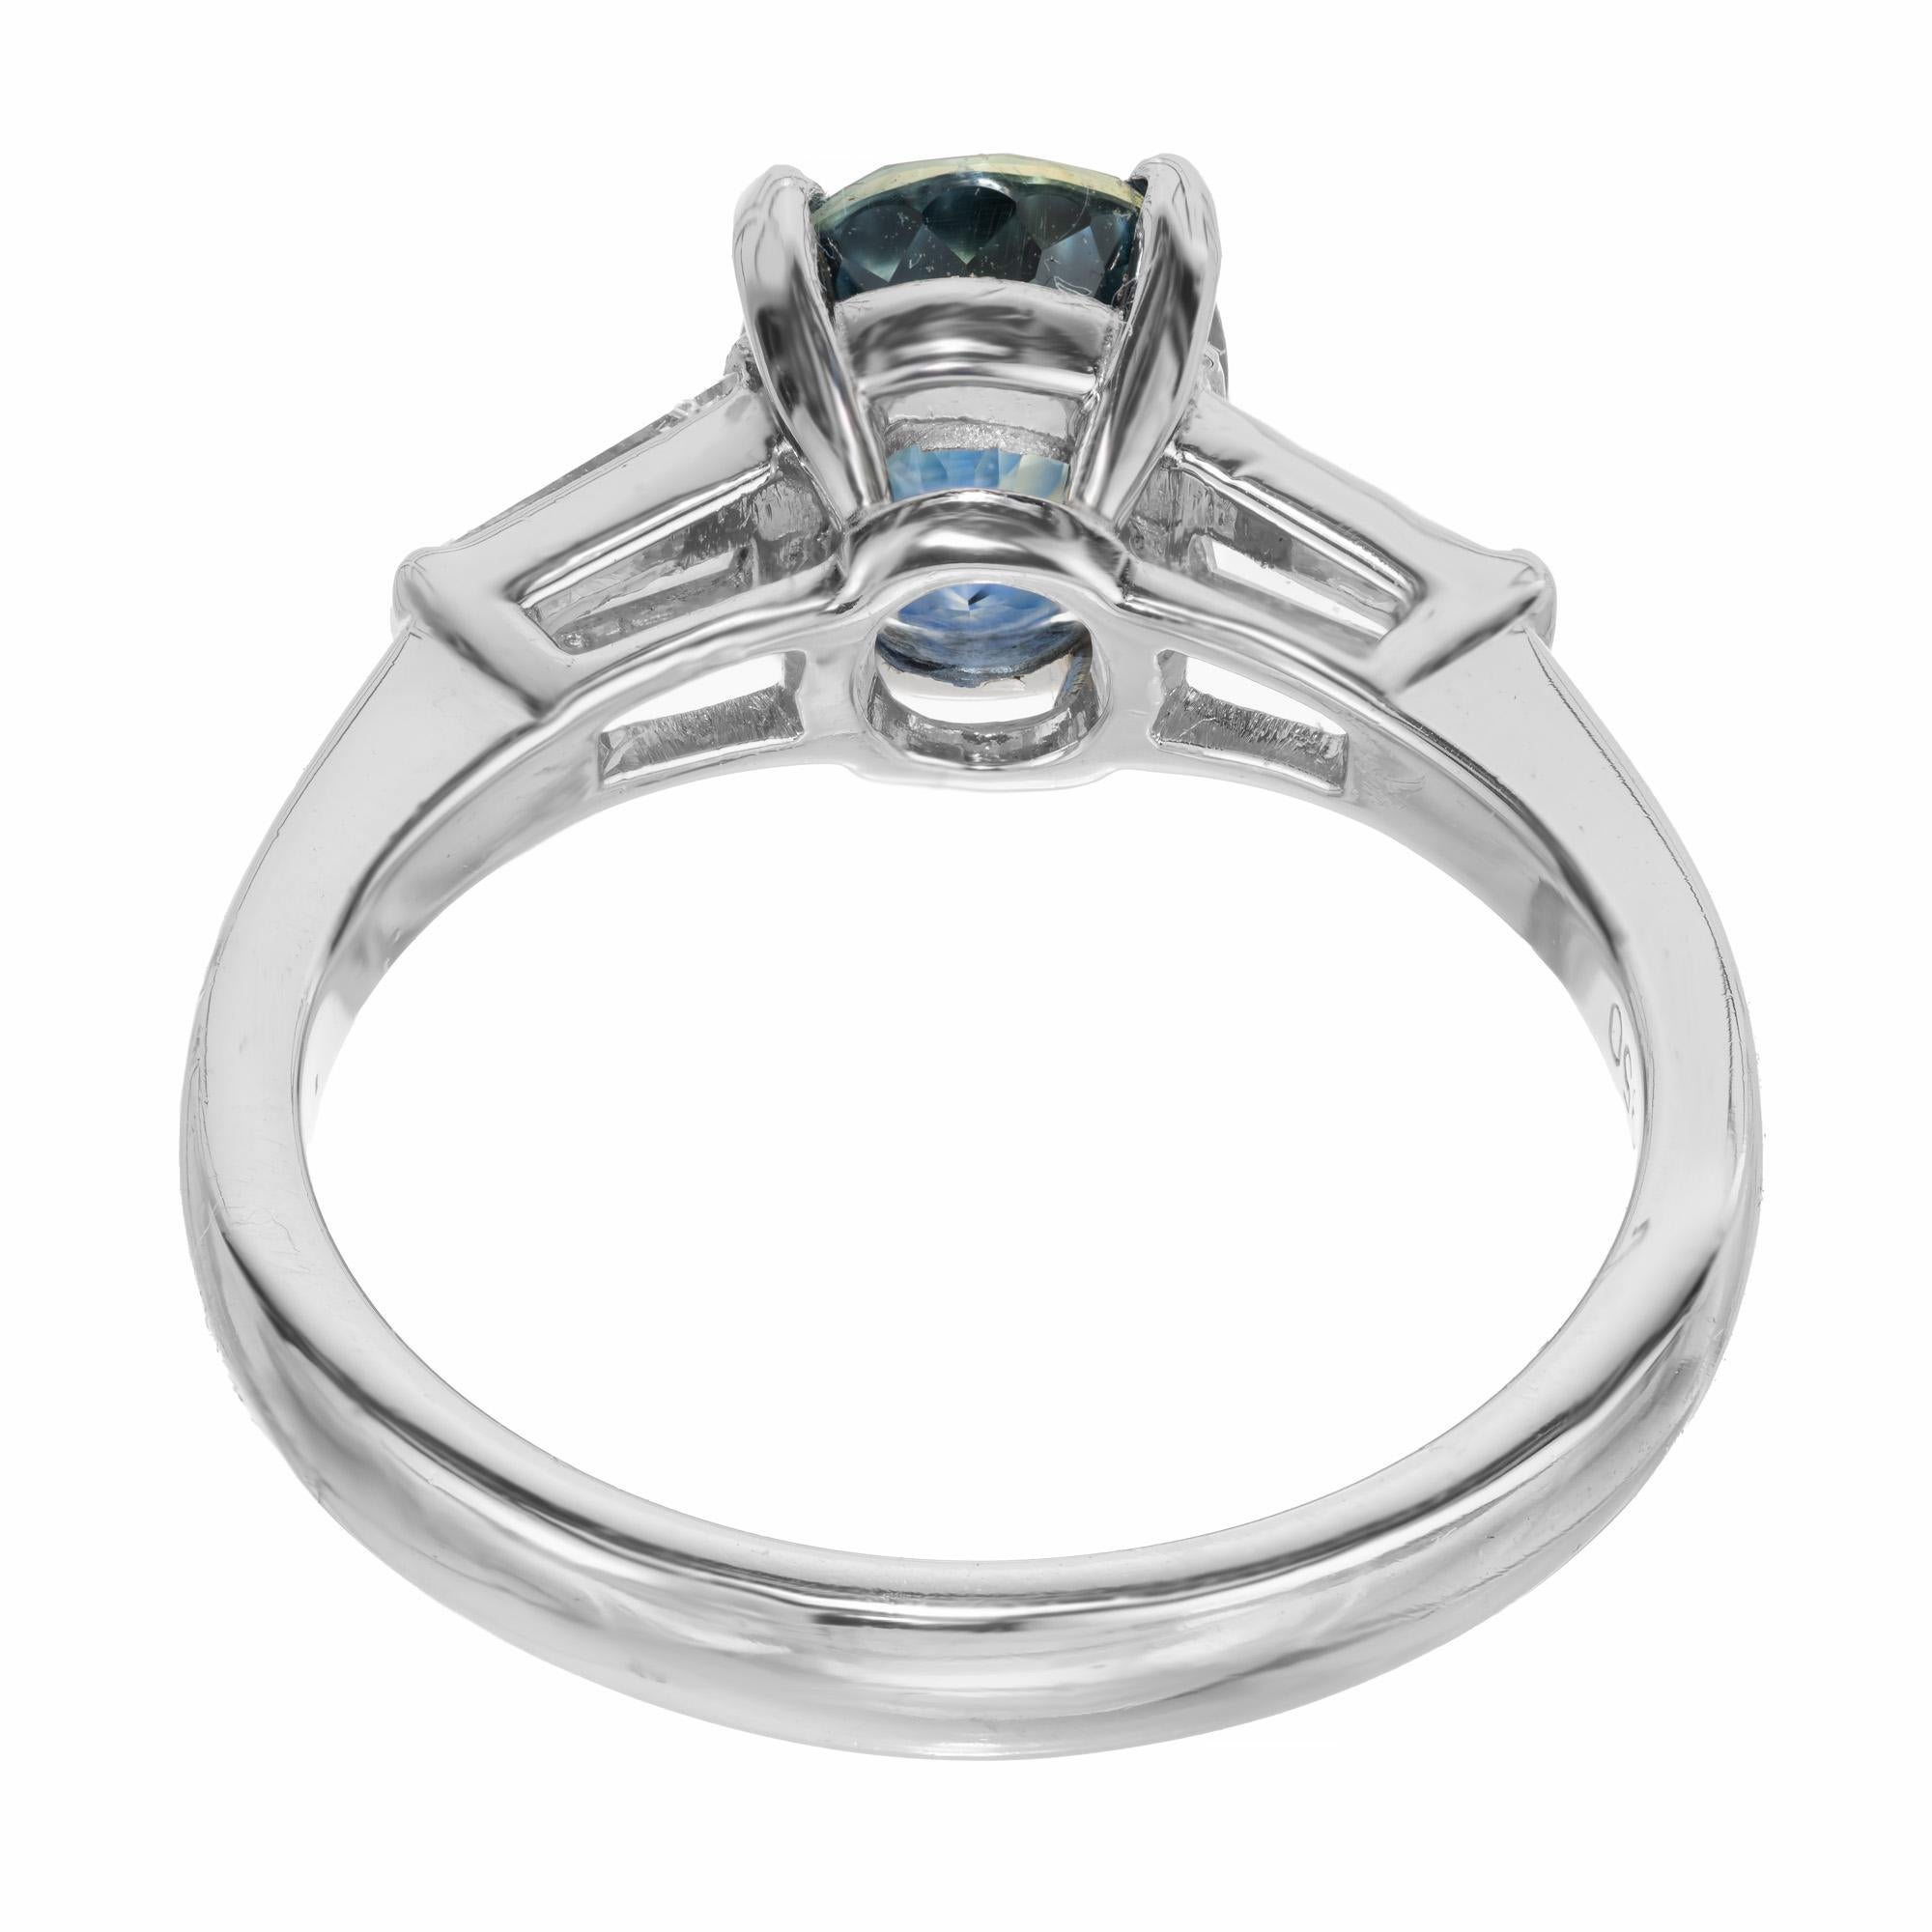 GIA 2.41 Carat Green Blue Oval Sapphire Diamond Platinum Engagement Ring In Excellent Condition For Sale In Stamford, CT